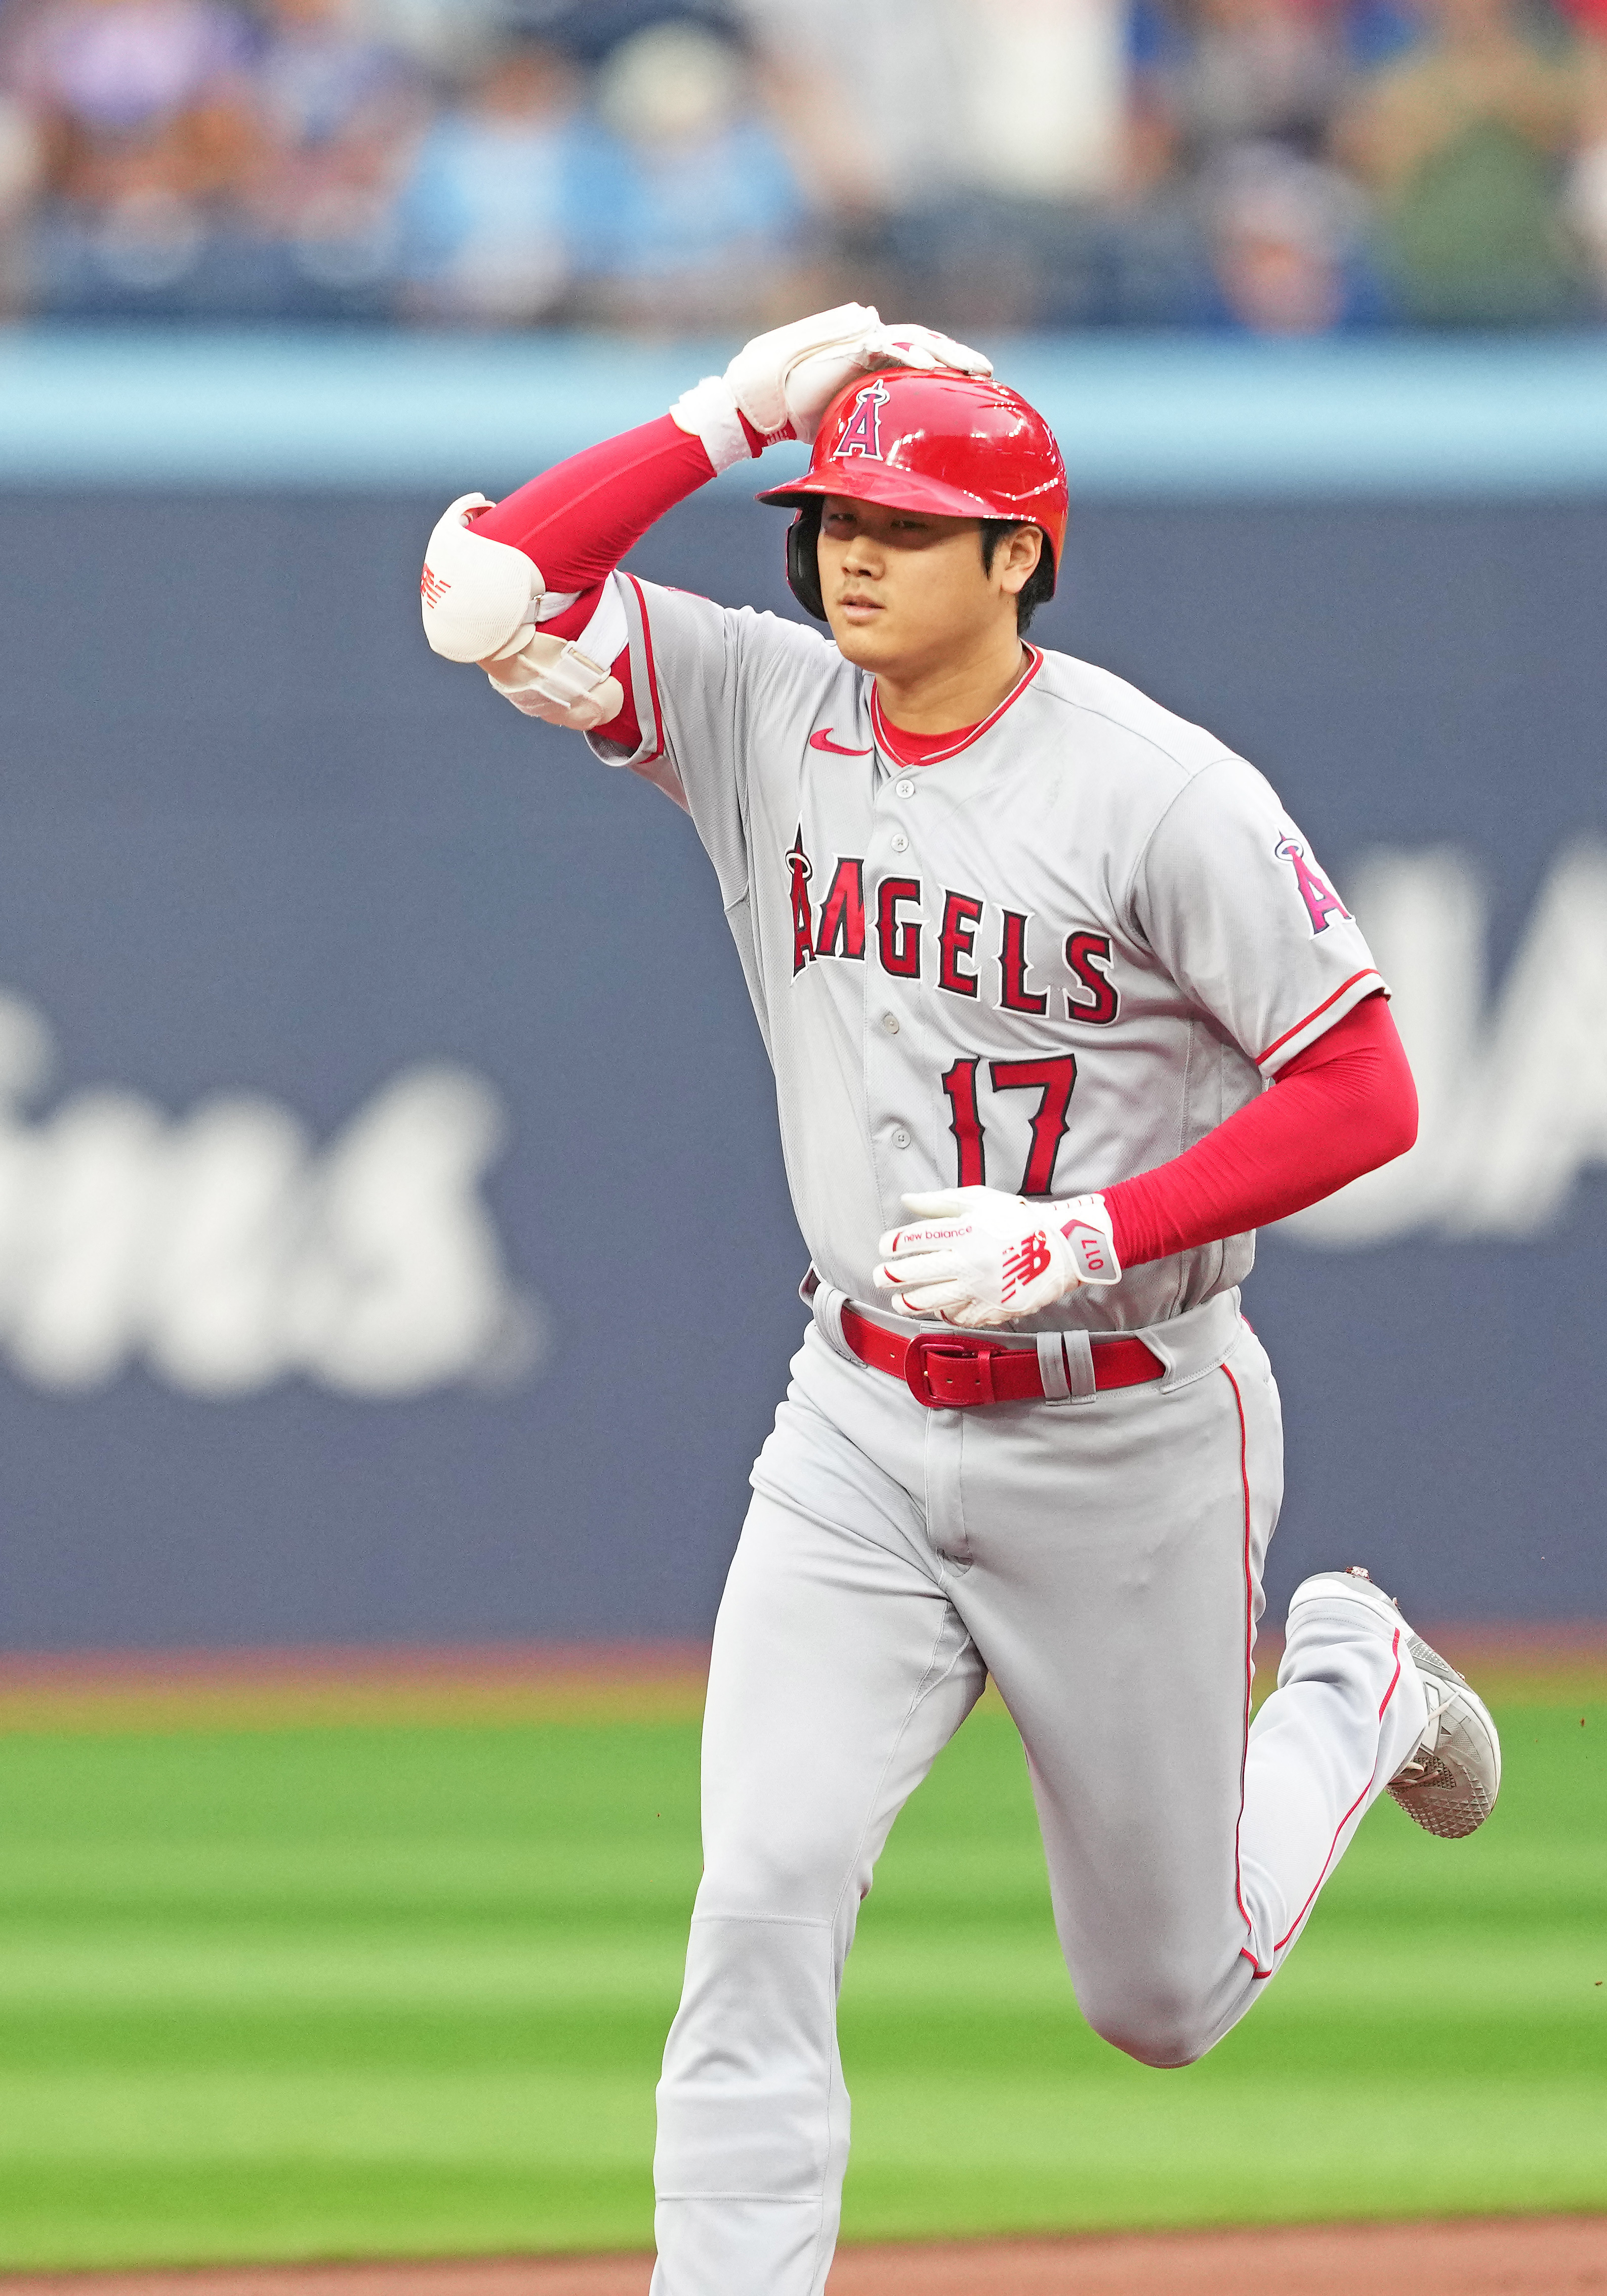 Ohtani reaches 400 MLB strikeouts, Angels beat Astros in 12 - The Mainichi